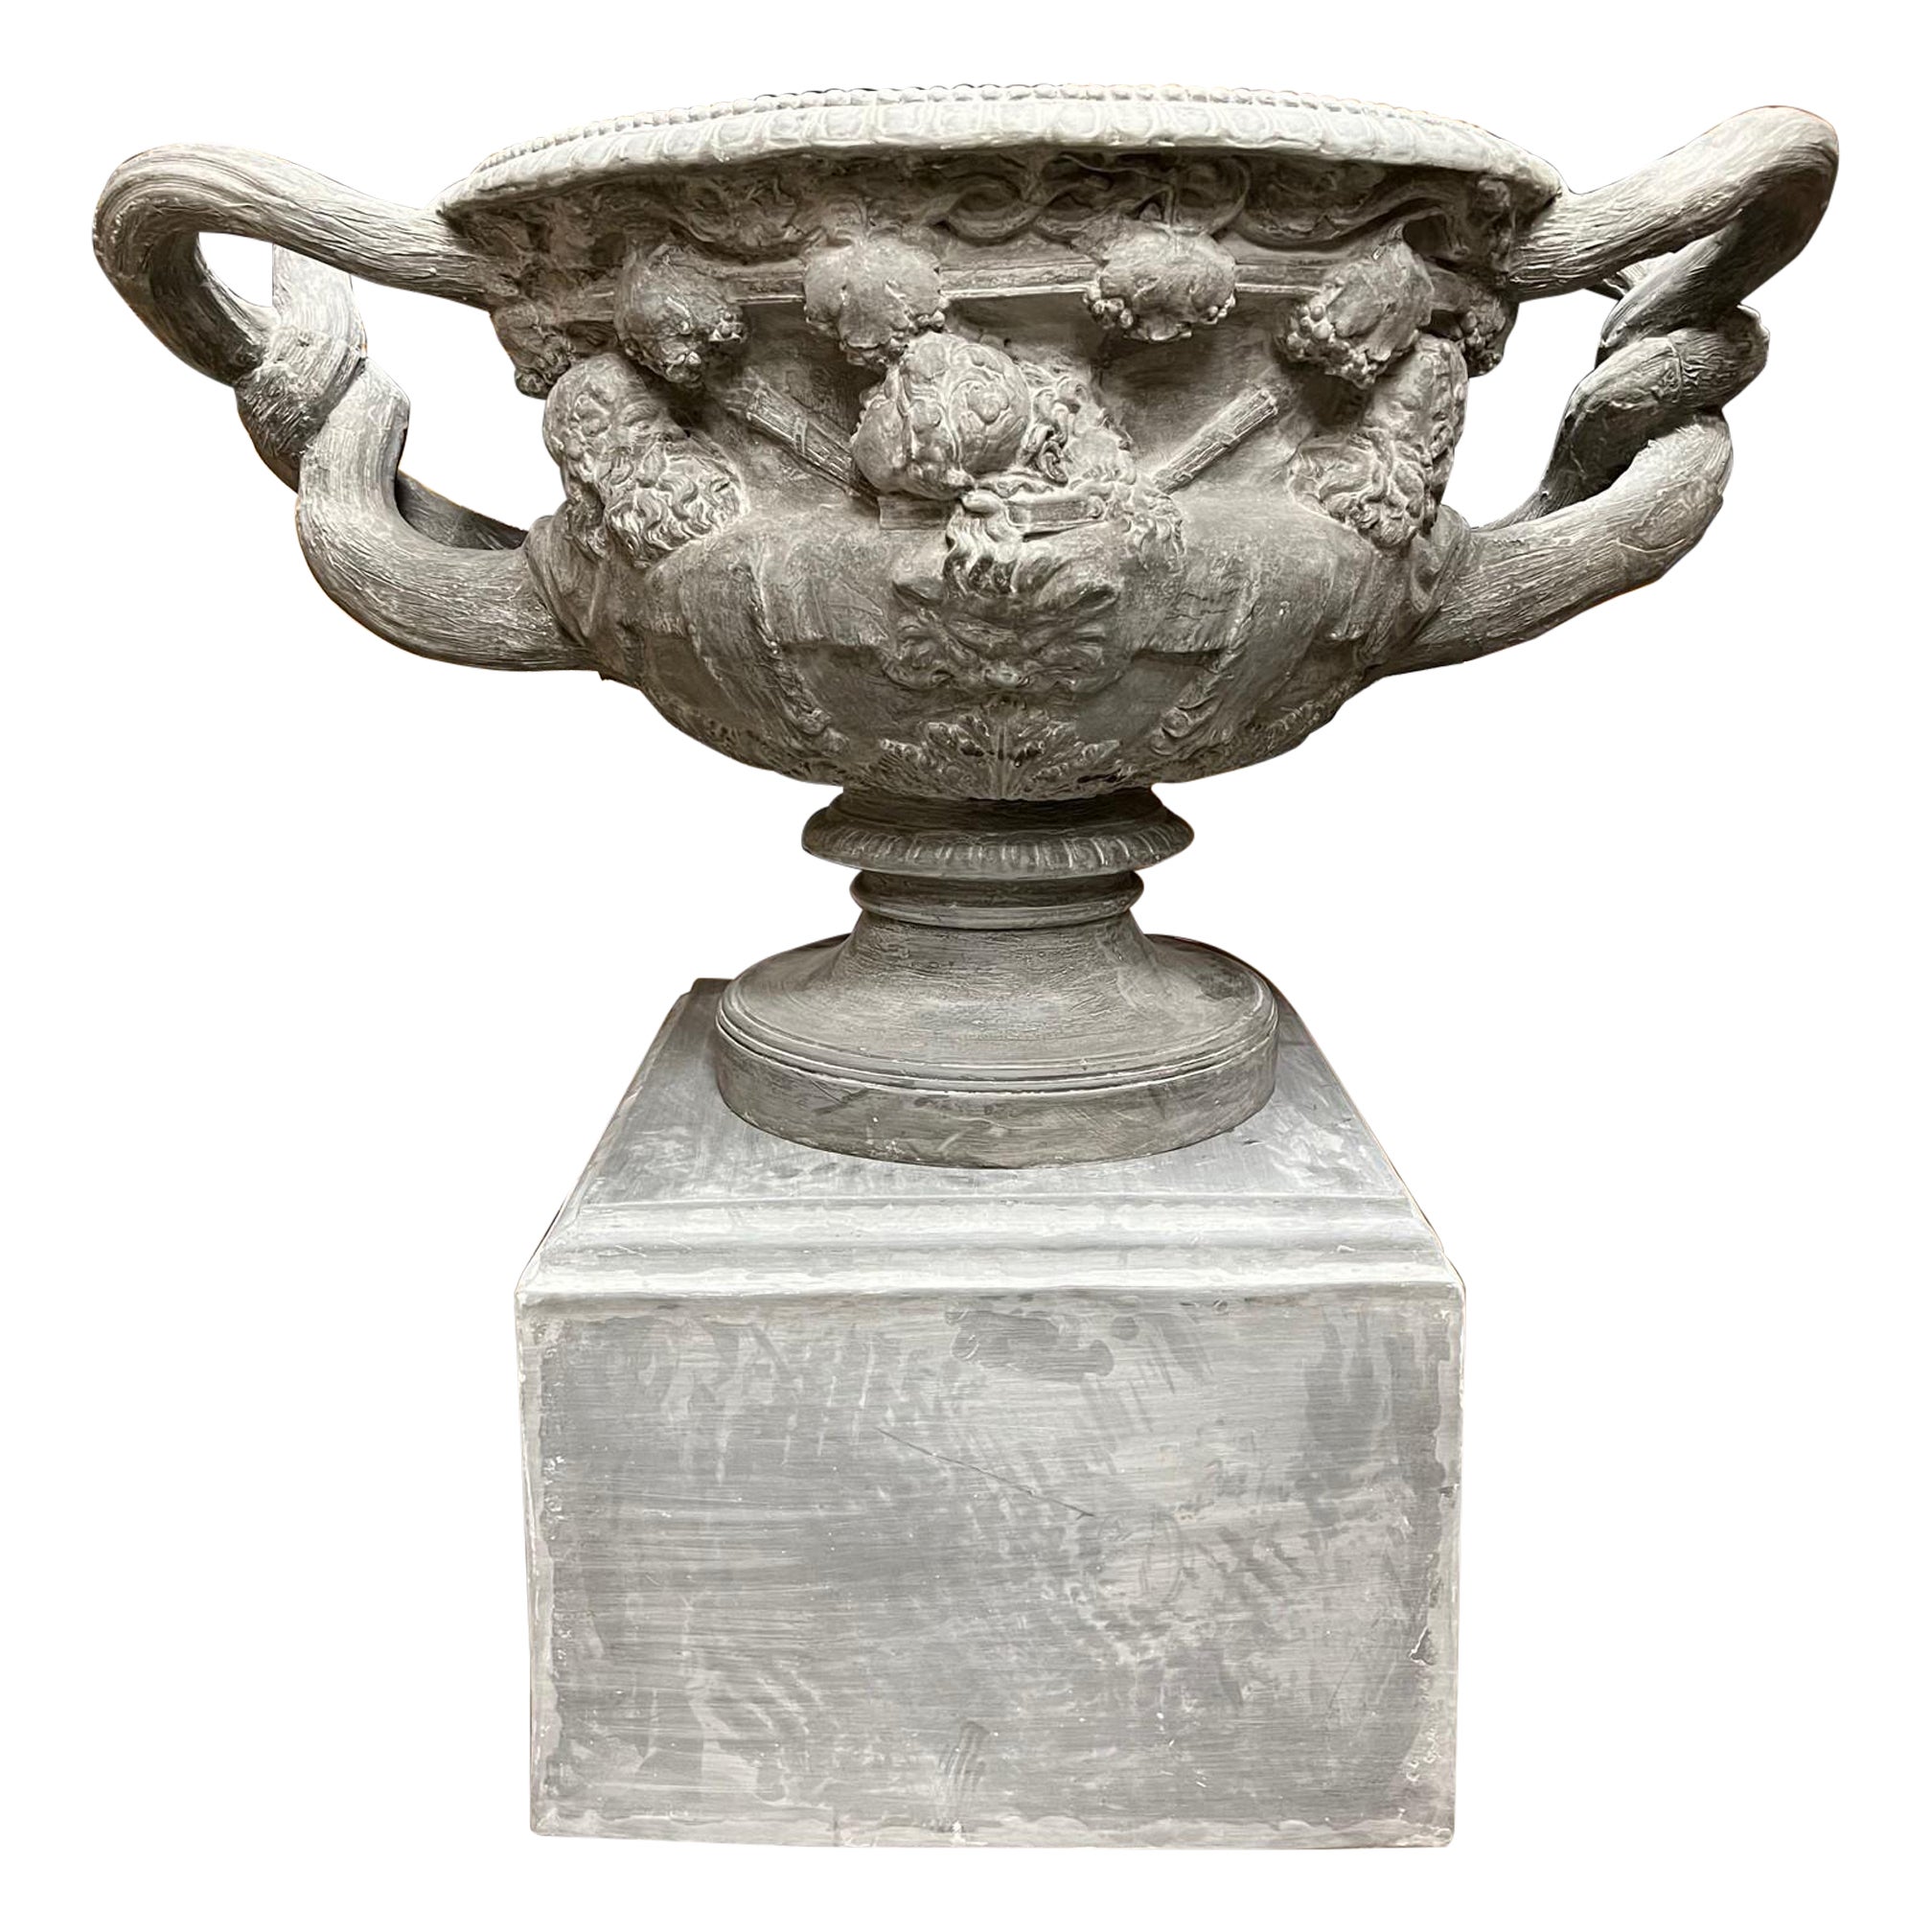 Monumental Reproduction Fiberglass Urn with Large Handles on a Pedestal 